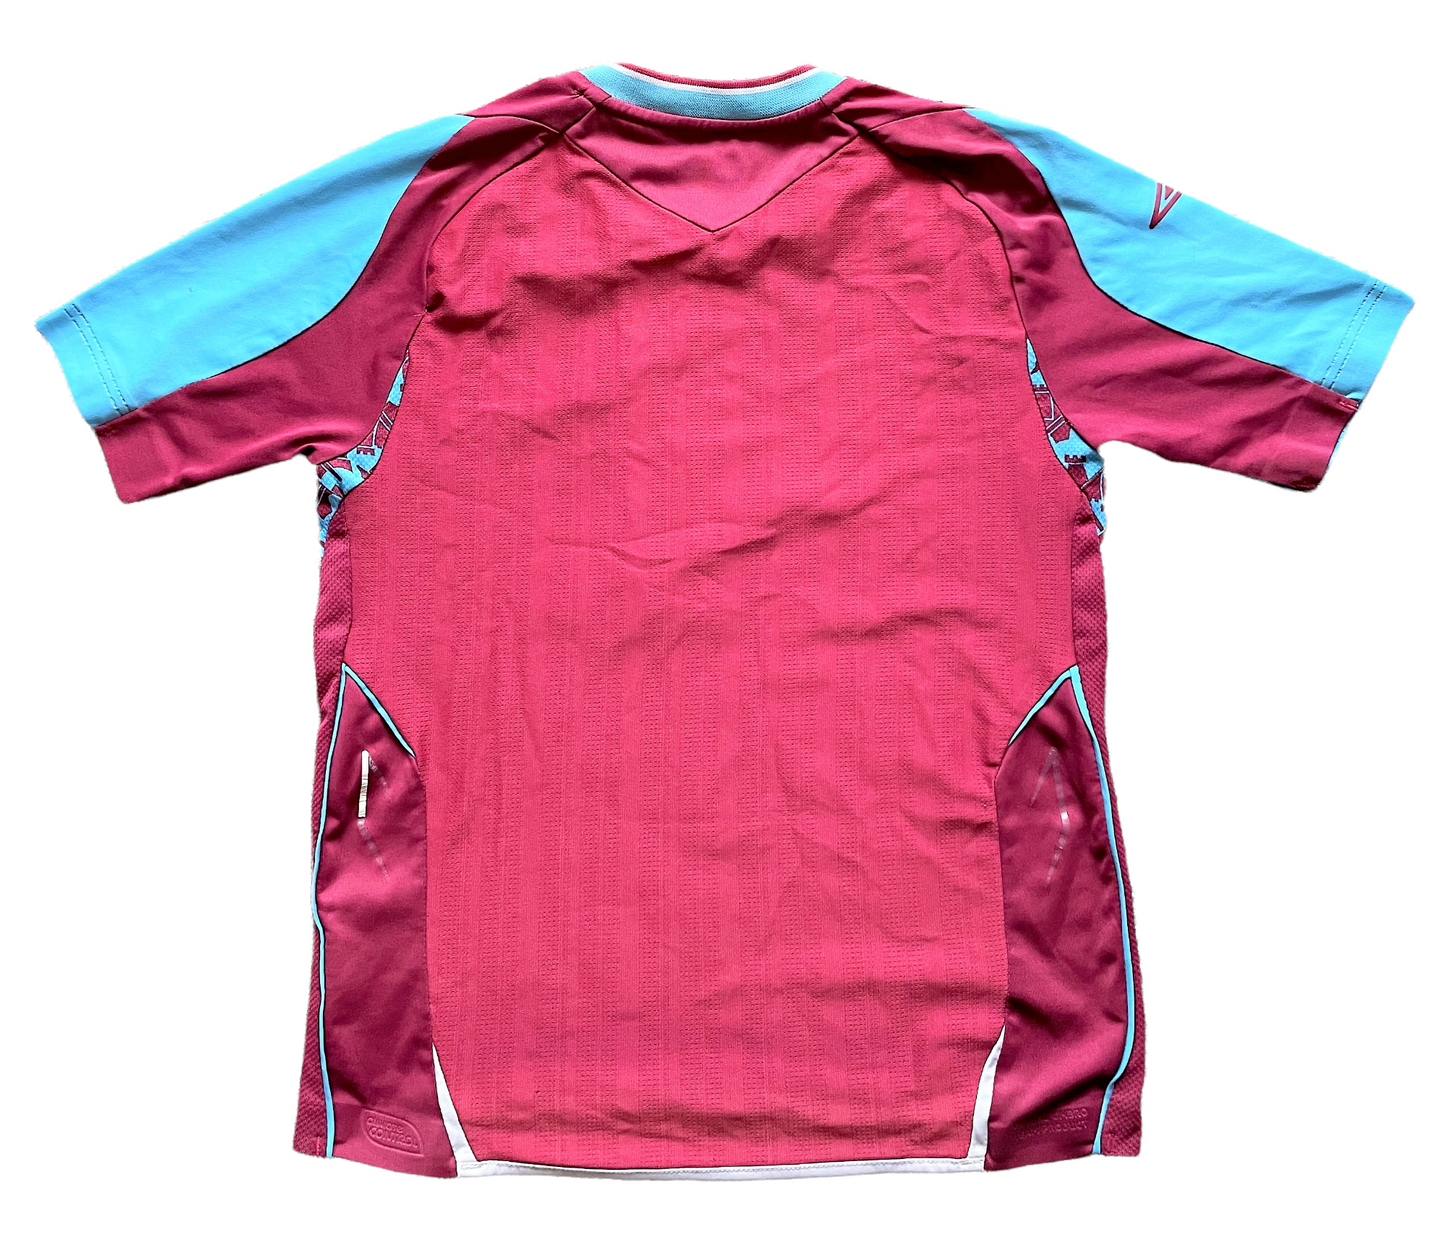 West Ham 2007 Home Shirt (very good) Small Boys. Height 17 inches